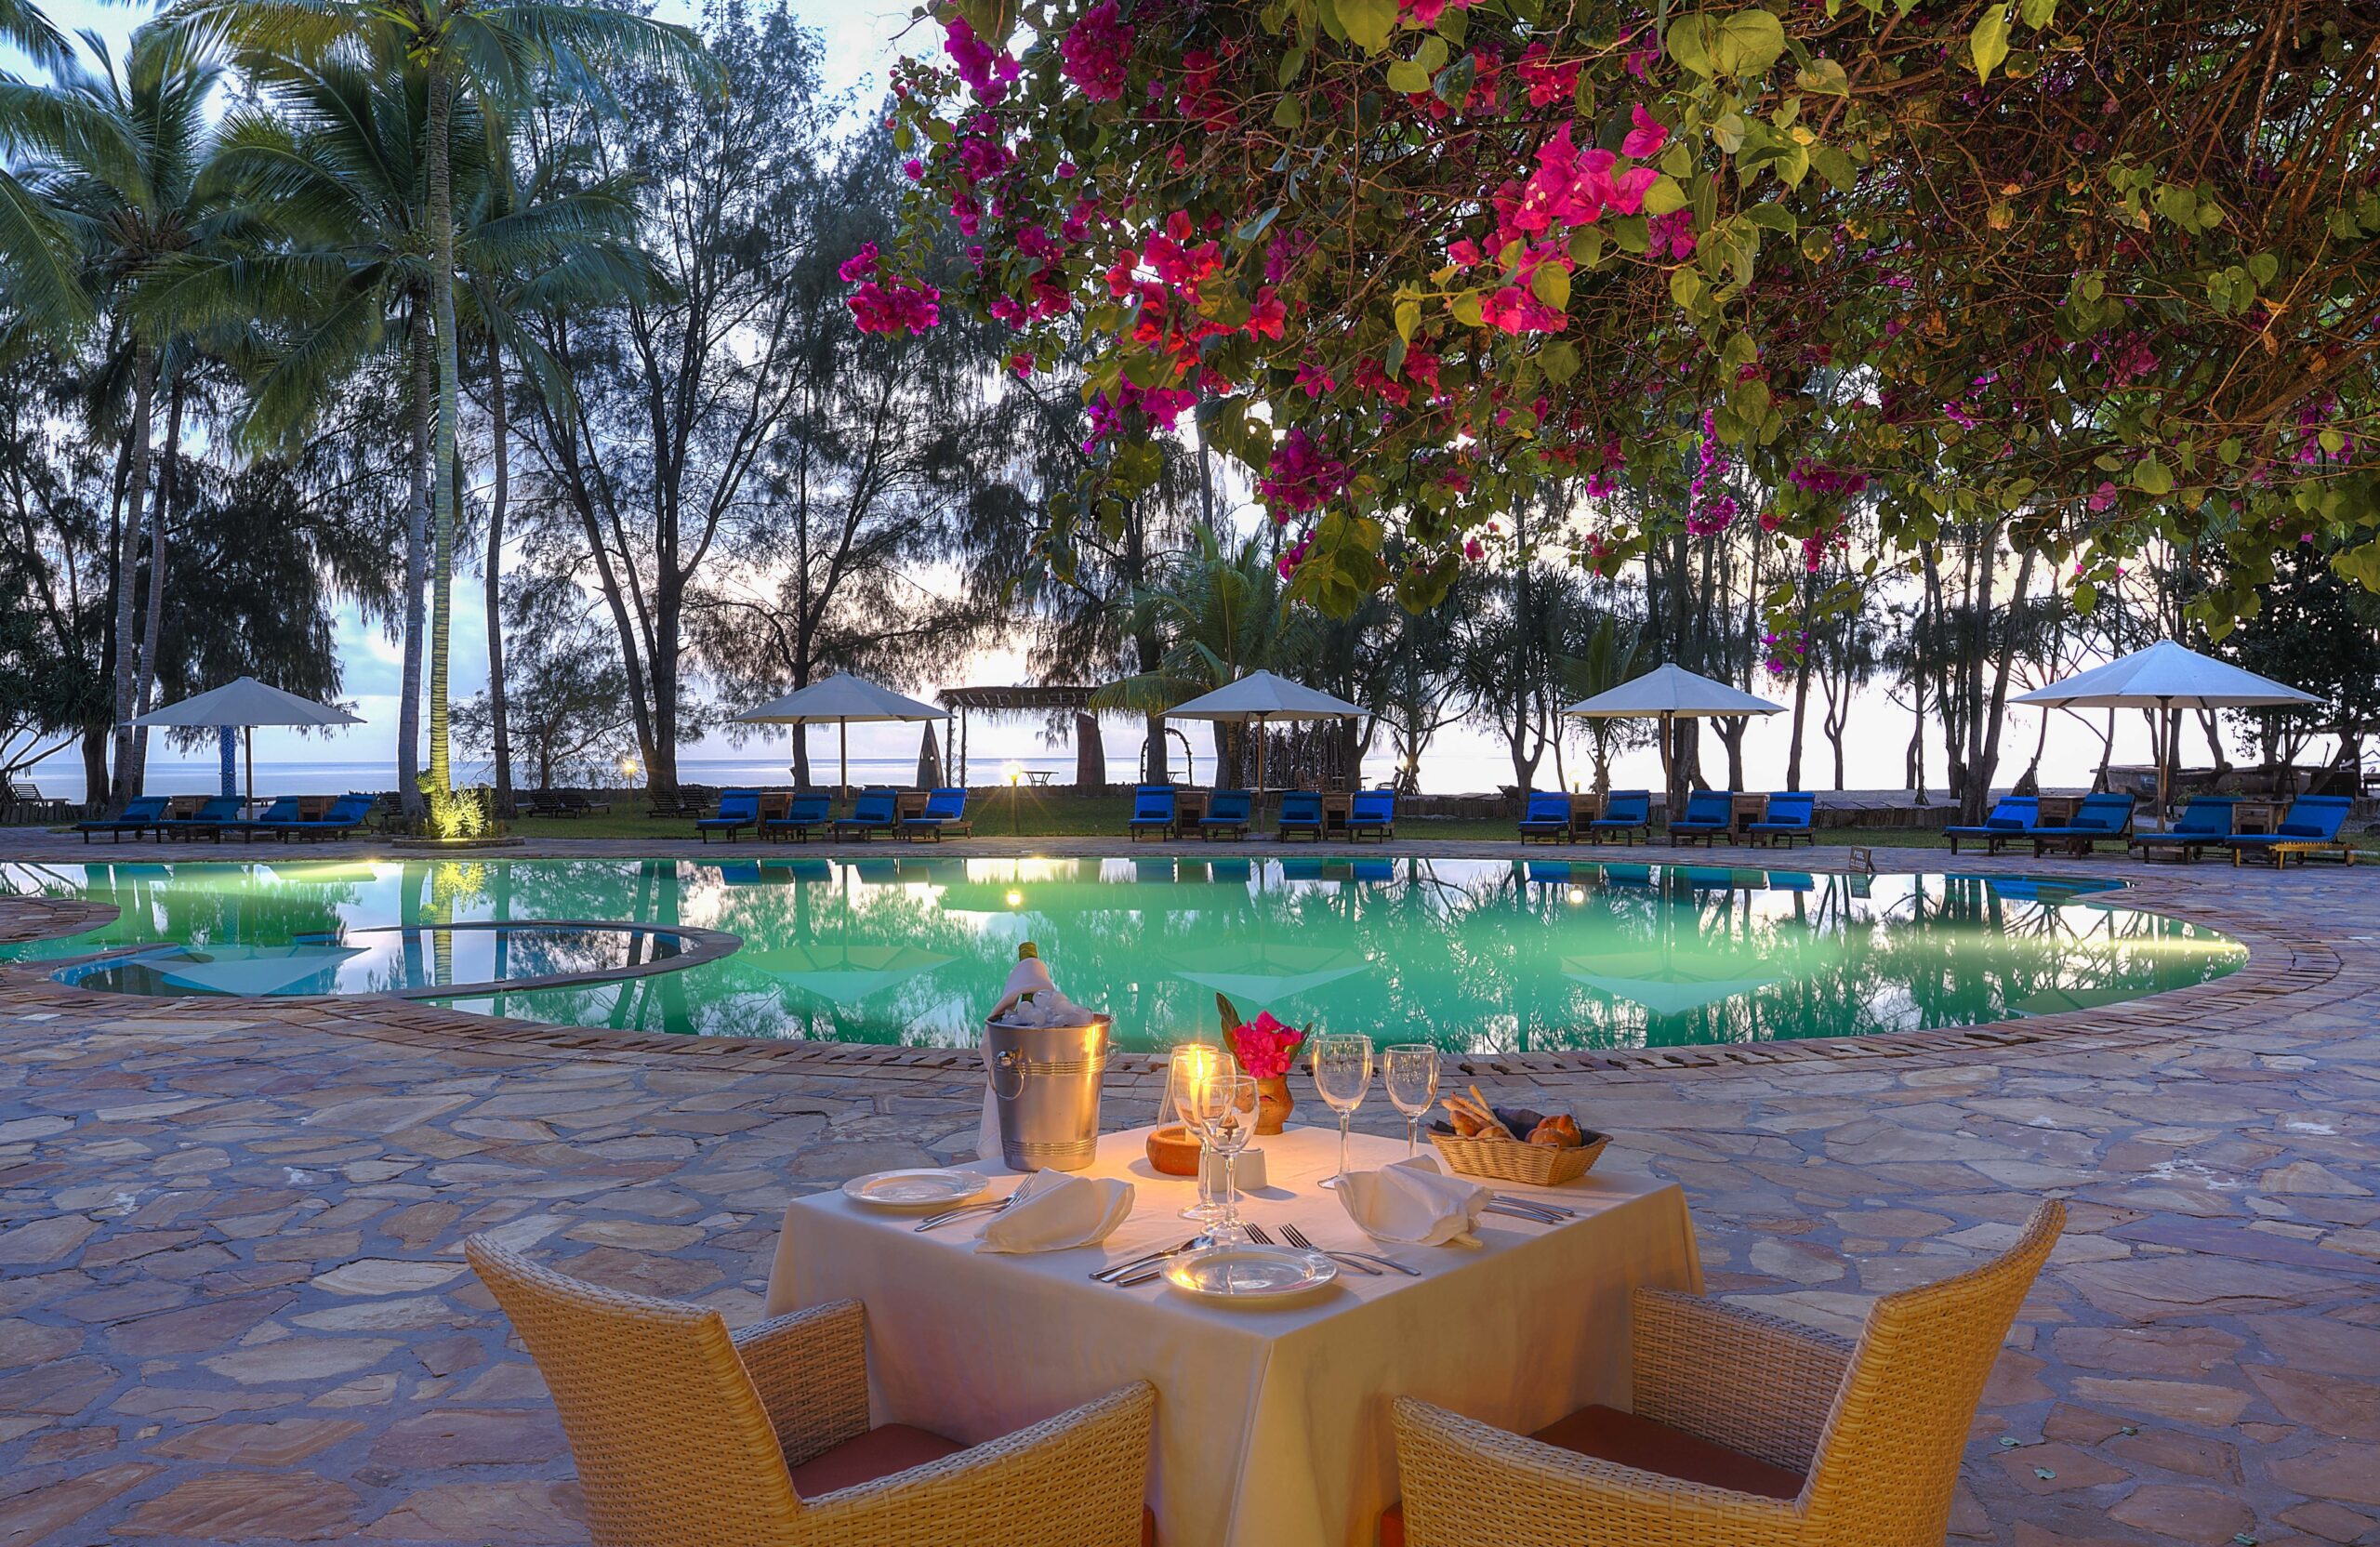 Dinner setting by the main pool